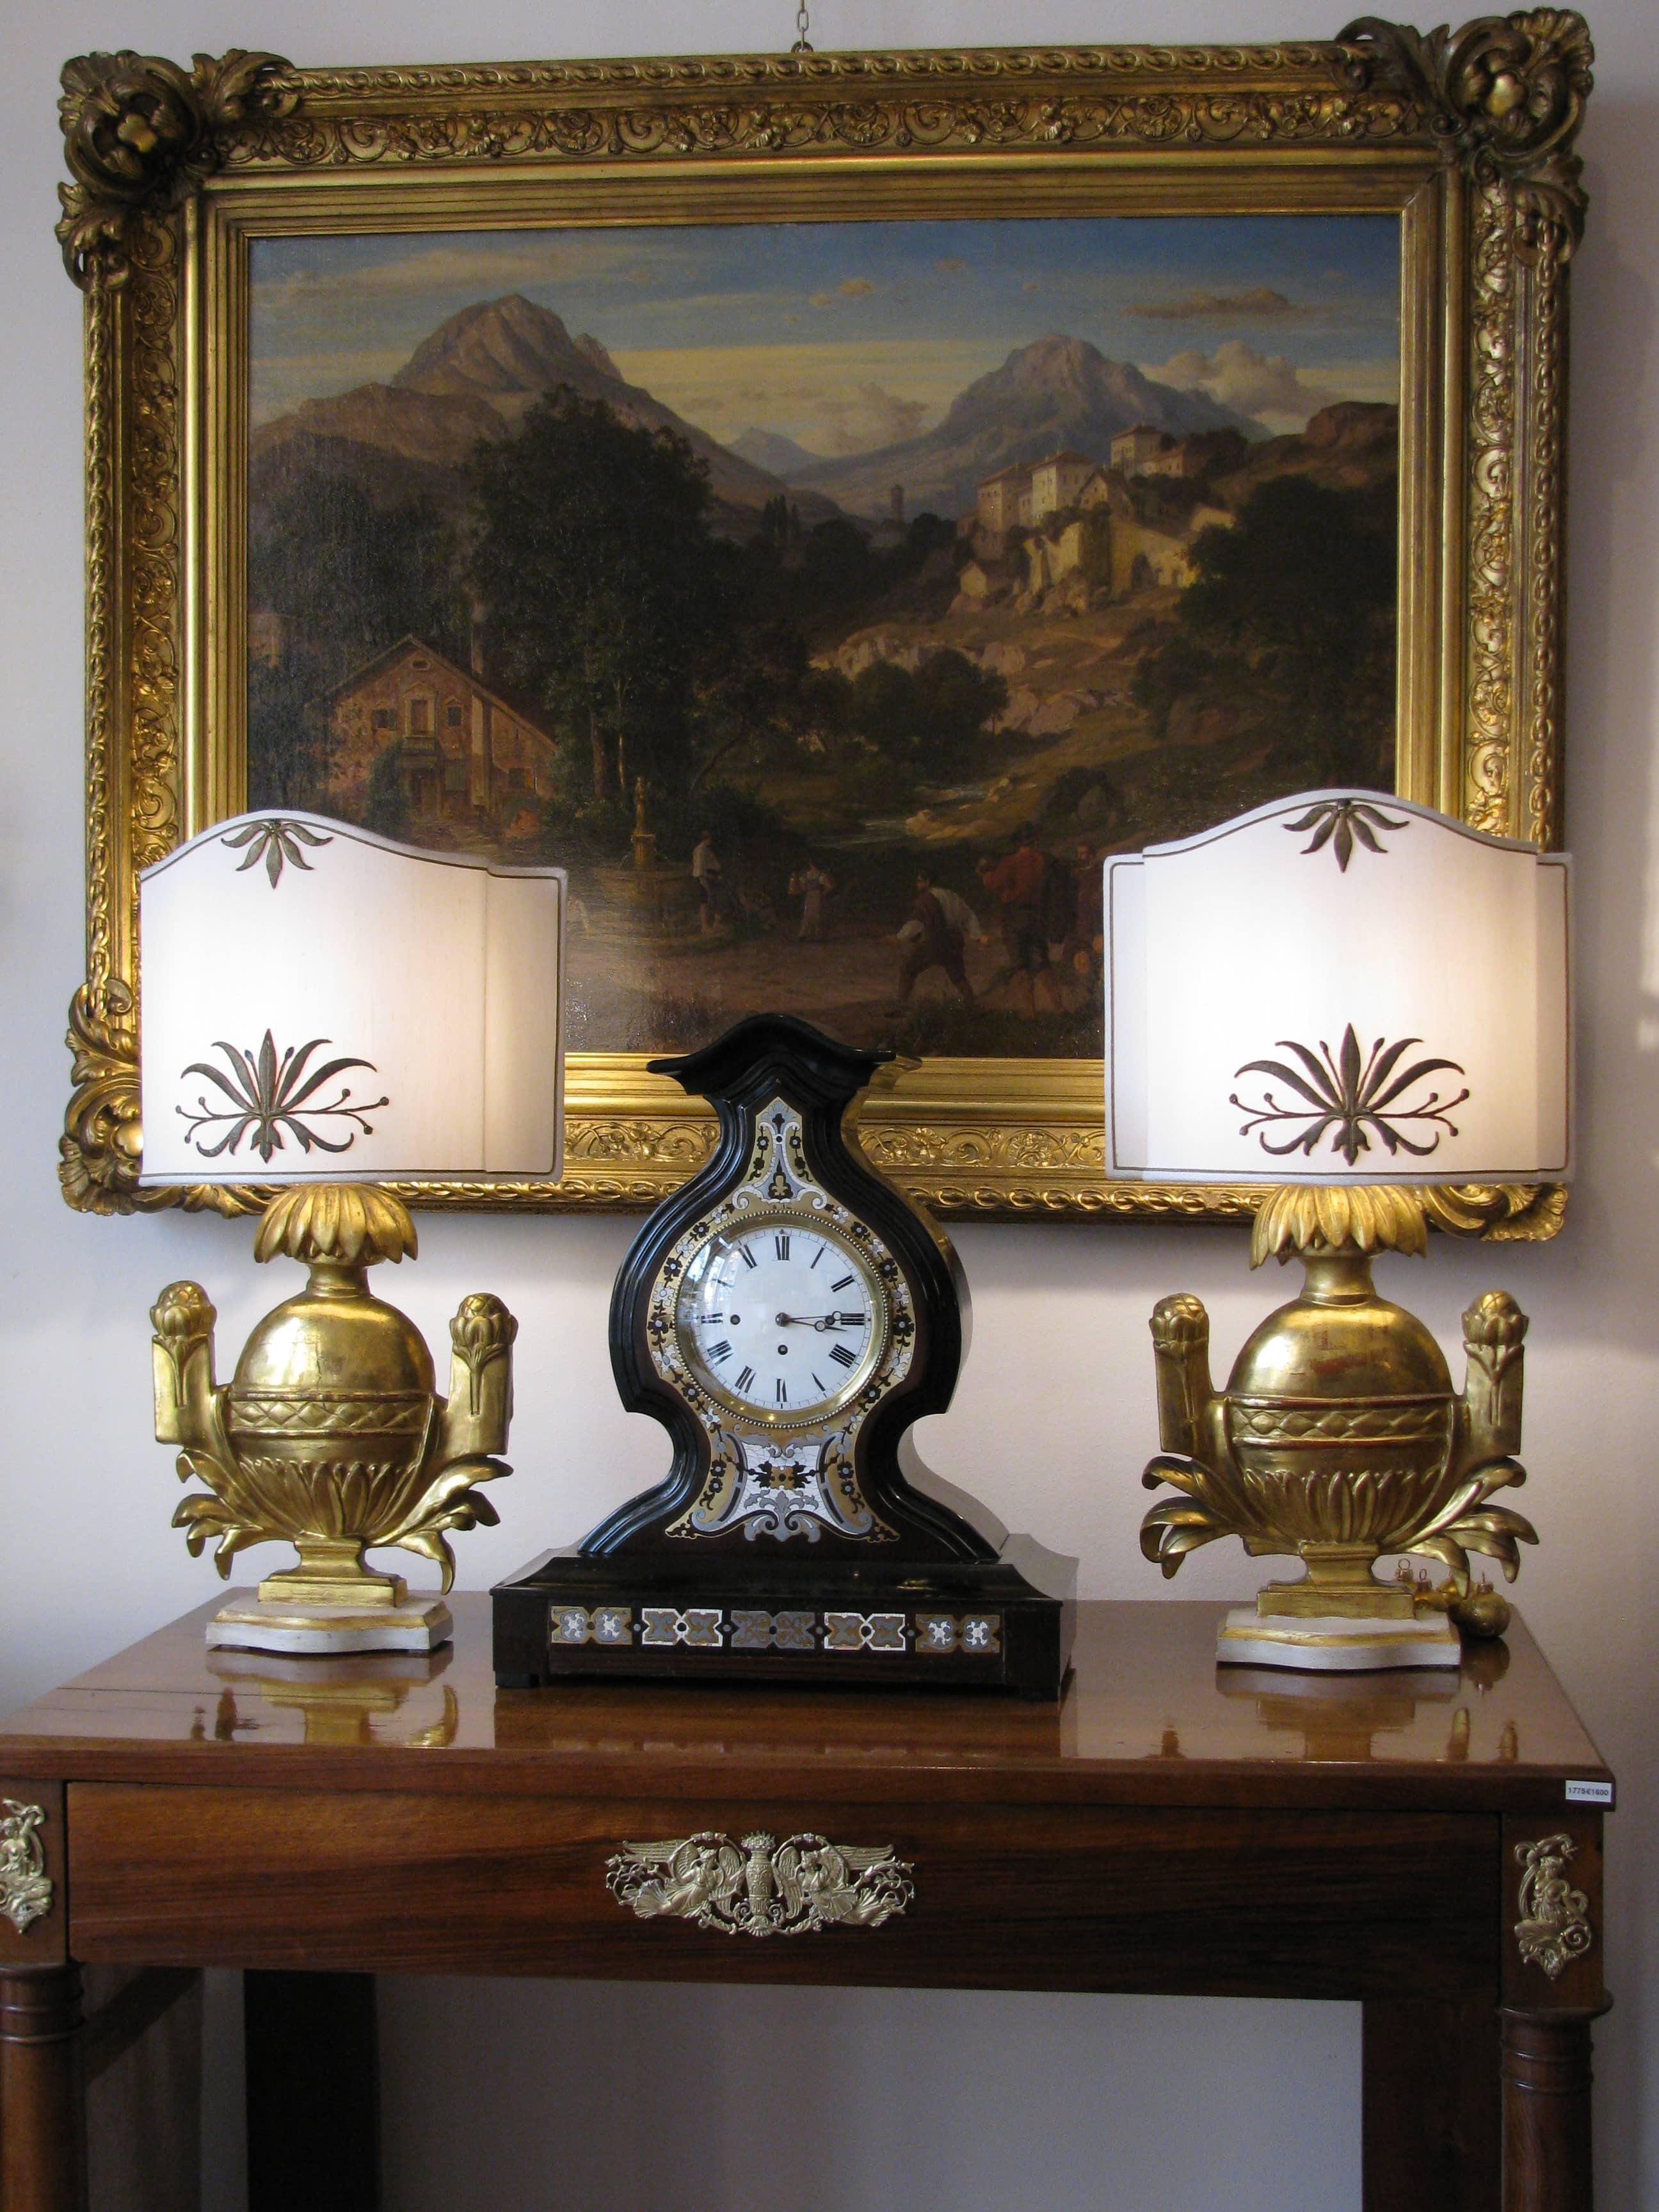 Viennese table clock inlaid with ebonized pear wood and rosewood case decorated with great marquetry, geometric ivory , zinc and brass inlays, in perfect condition.

The wooden case and inlays have been restored and finished with elegant